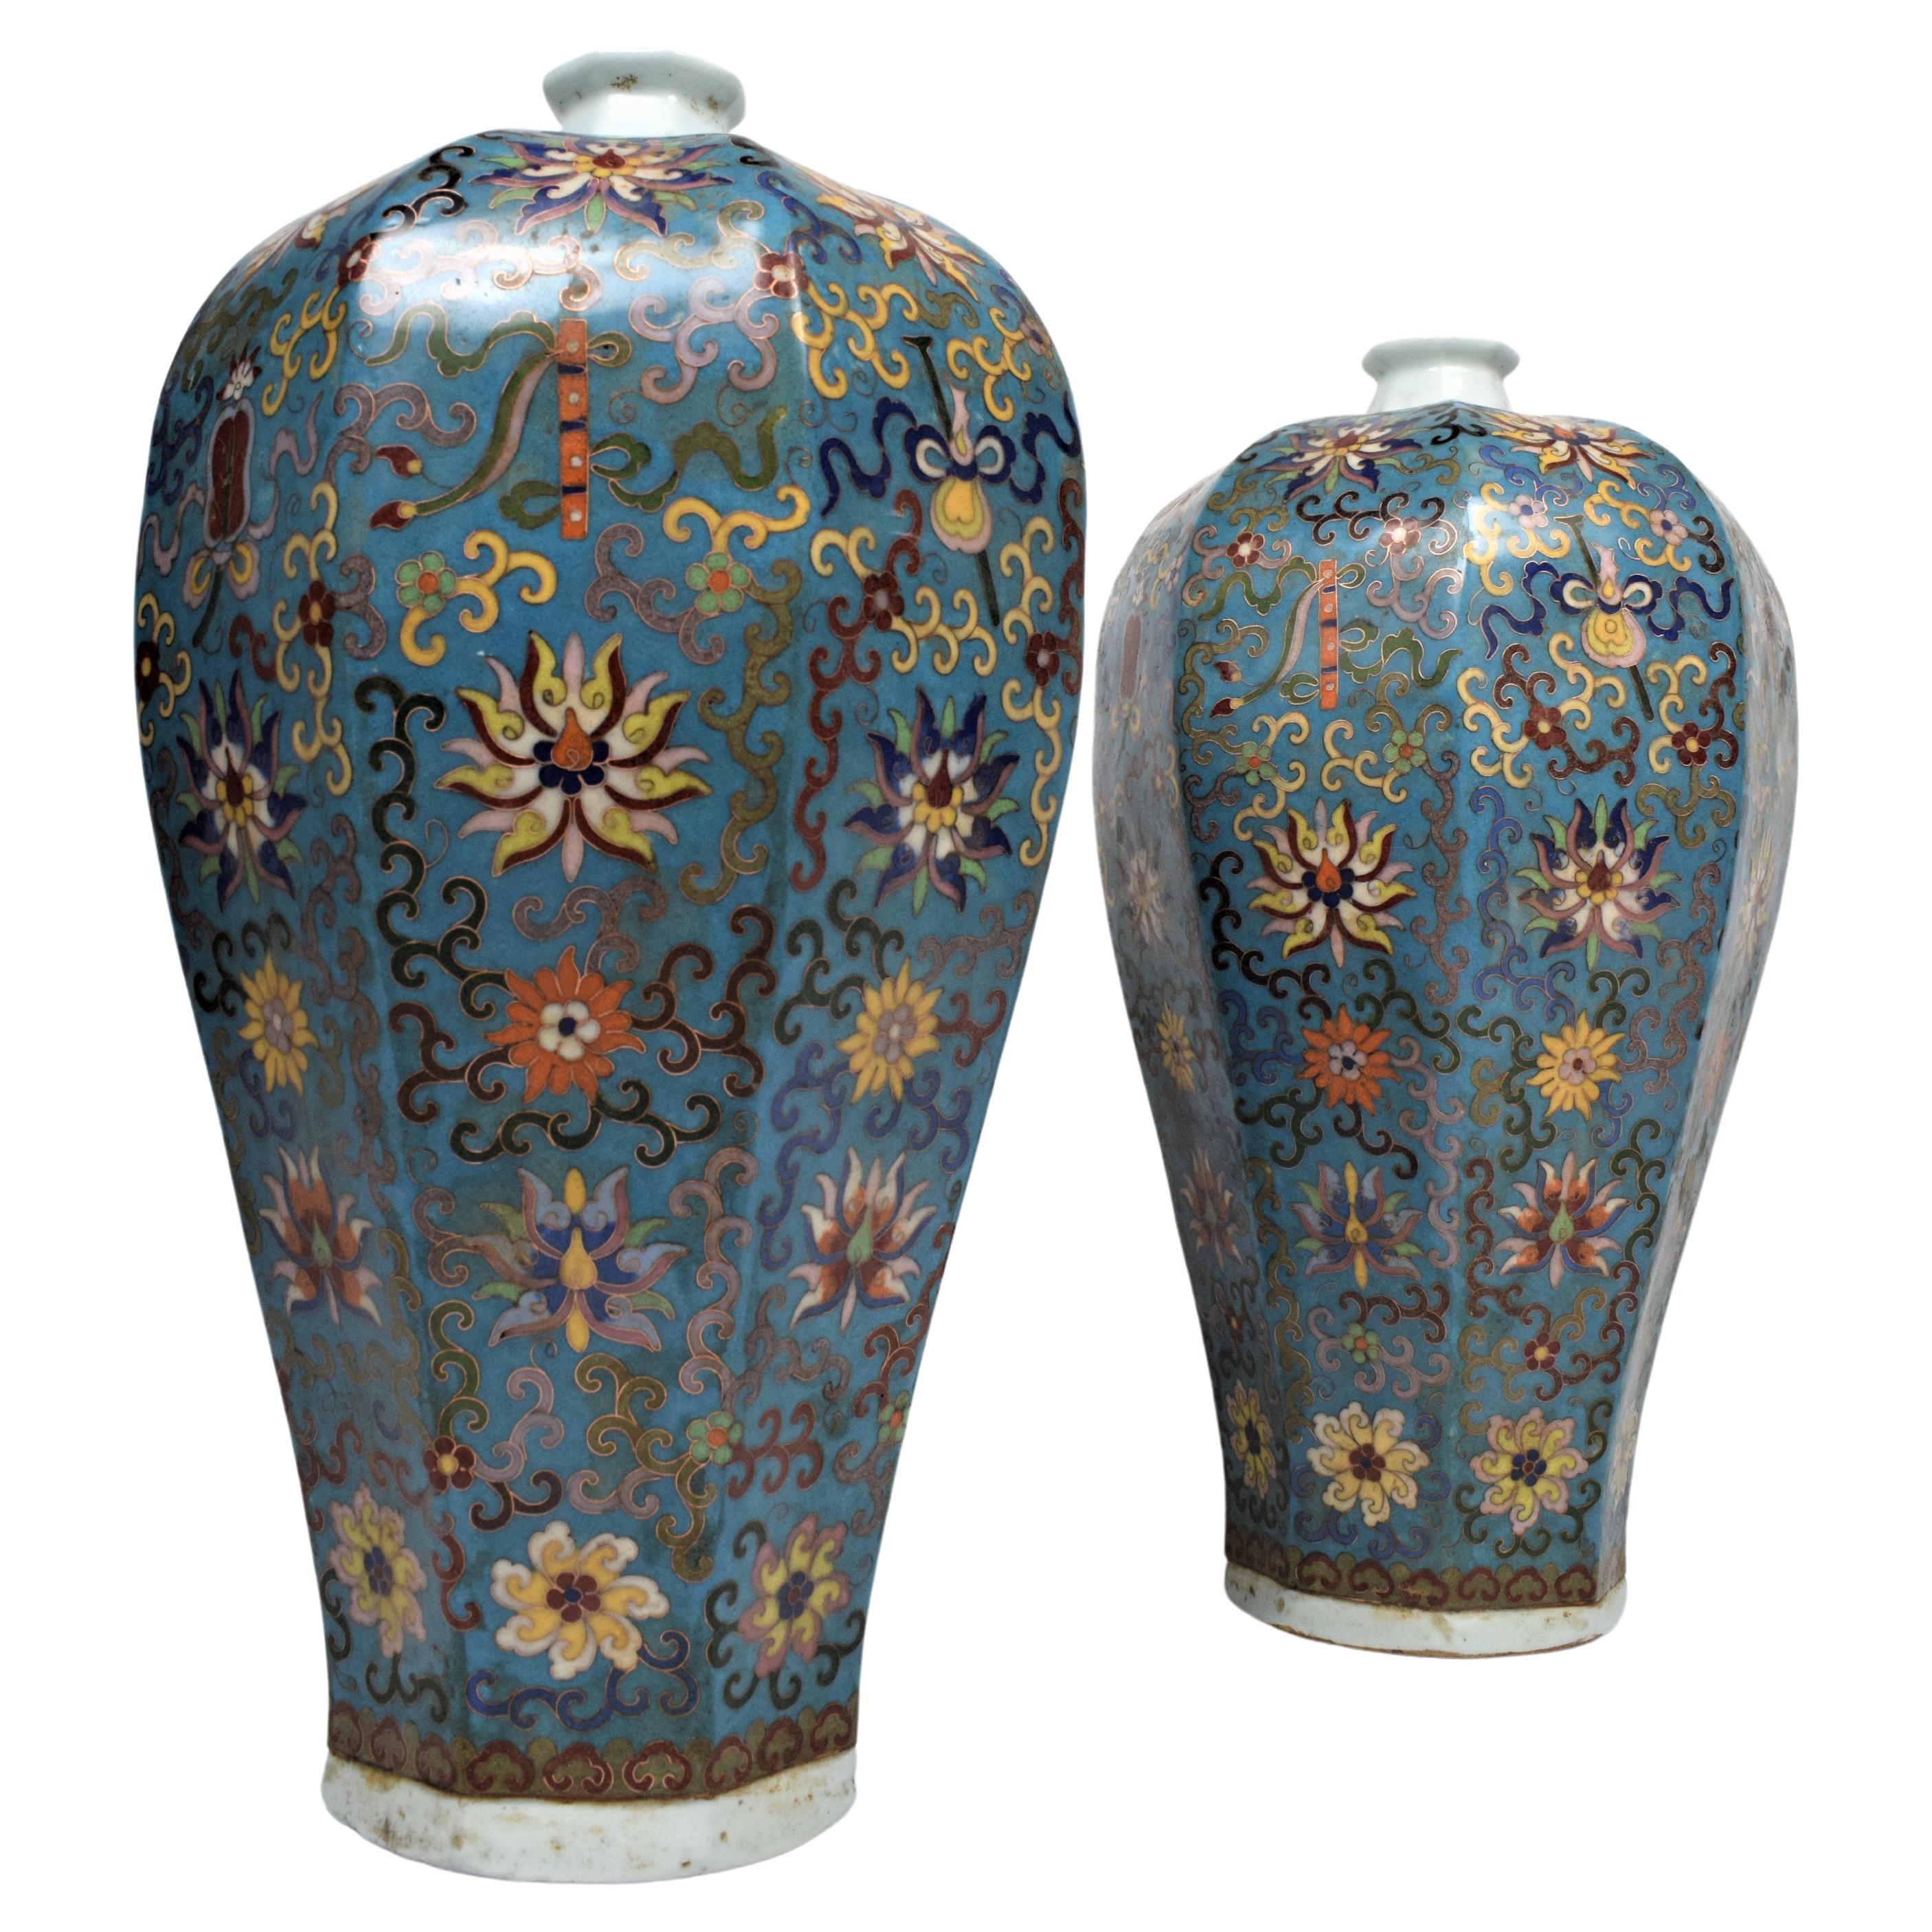 Chinese Large Cloisonné Enamel Bottle Vases Late Qing Dynasty, 19th Century For Sale